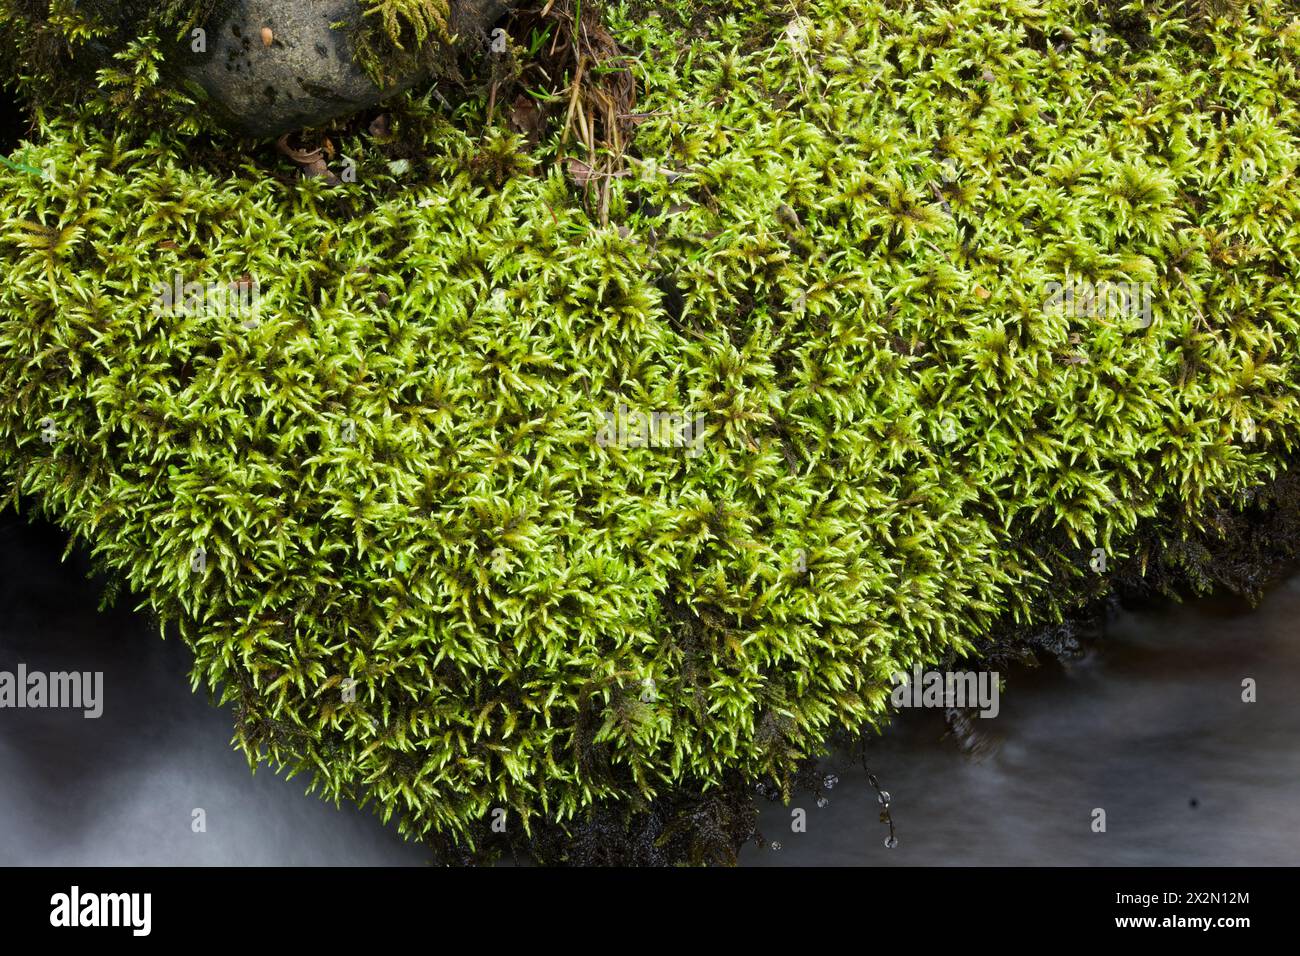 Brachythecium rivulare (River Feather-moss) grows on rocks and boulders that are sometimes submerged. It is found throughout the world. Stock Photo